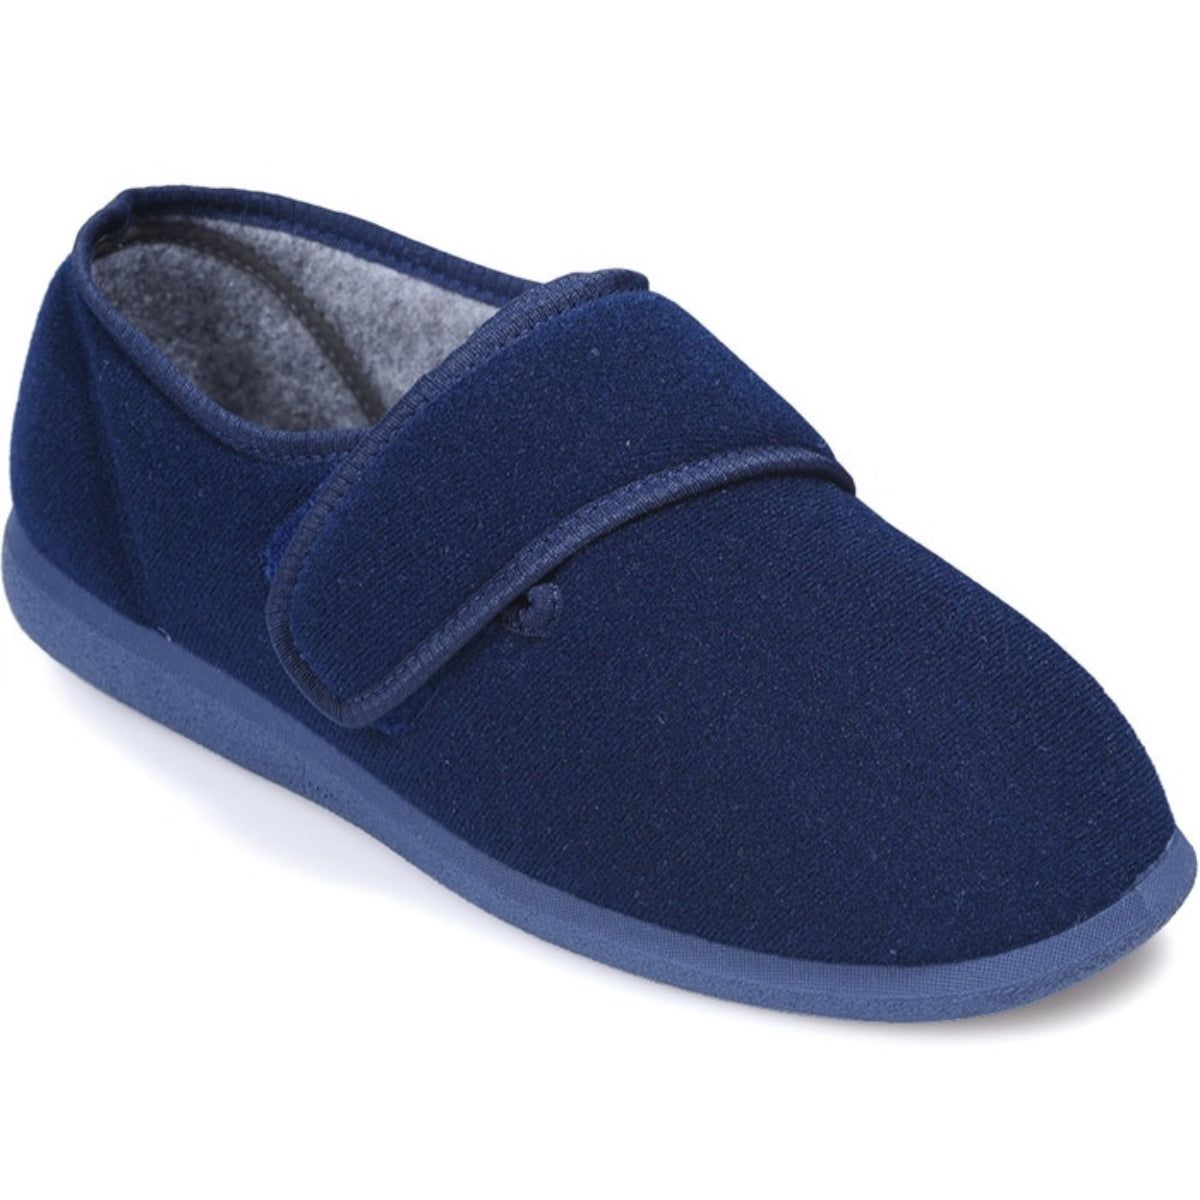 Richie. Seam-free slipper for problem or sensitive toes & swollen feet